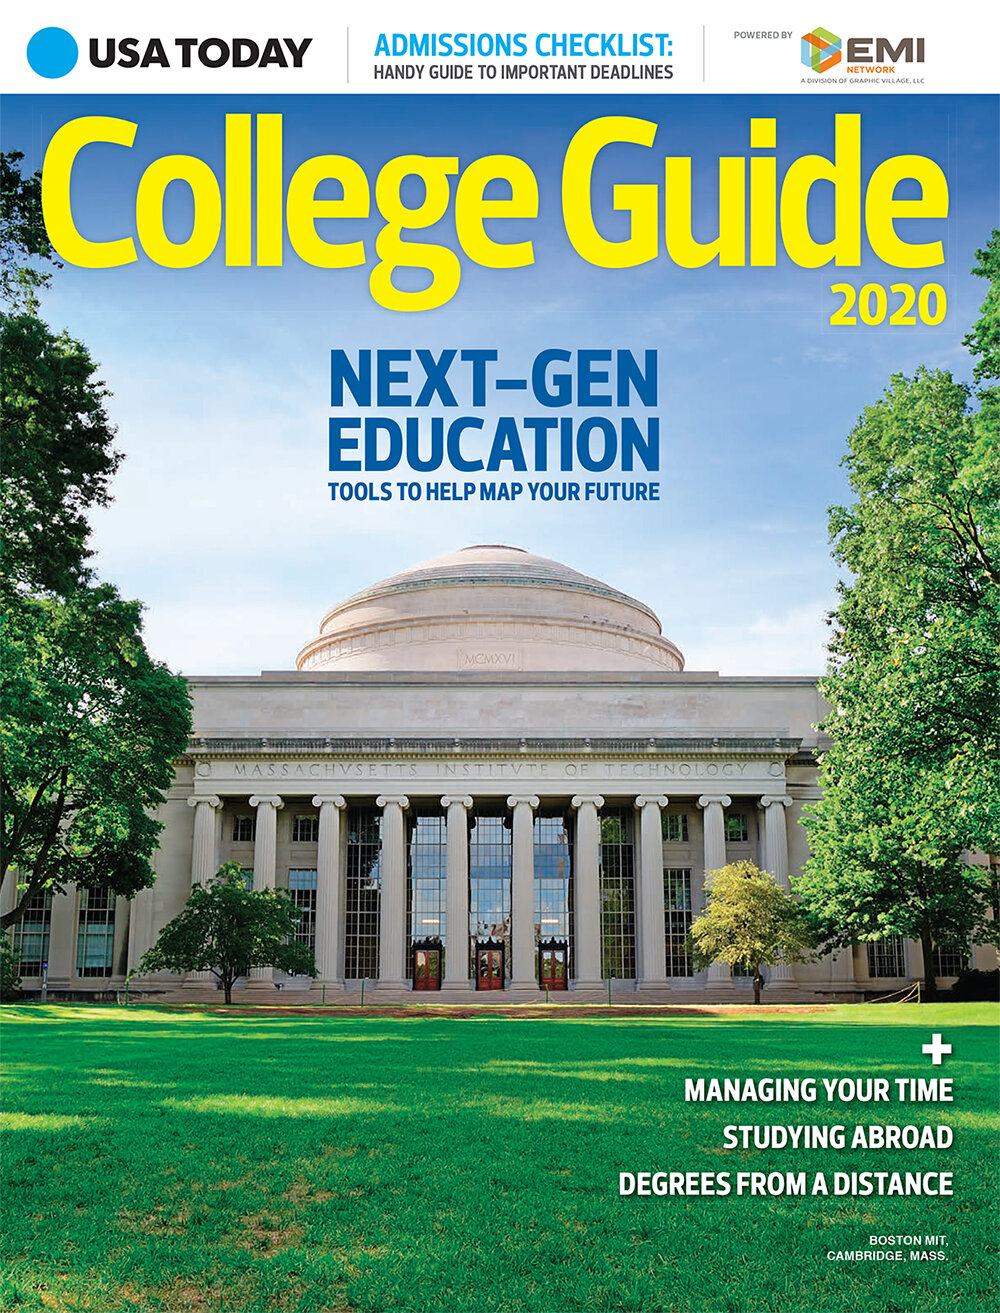 COLLEGE GUIDE Cover.jpg